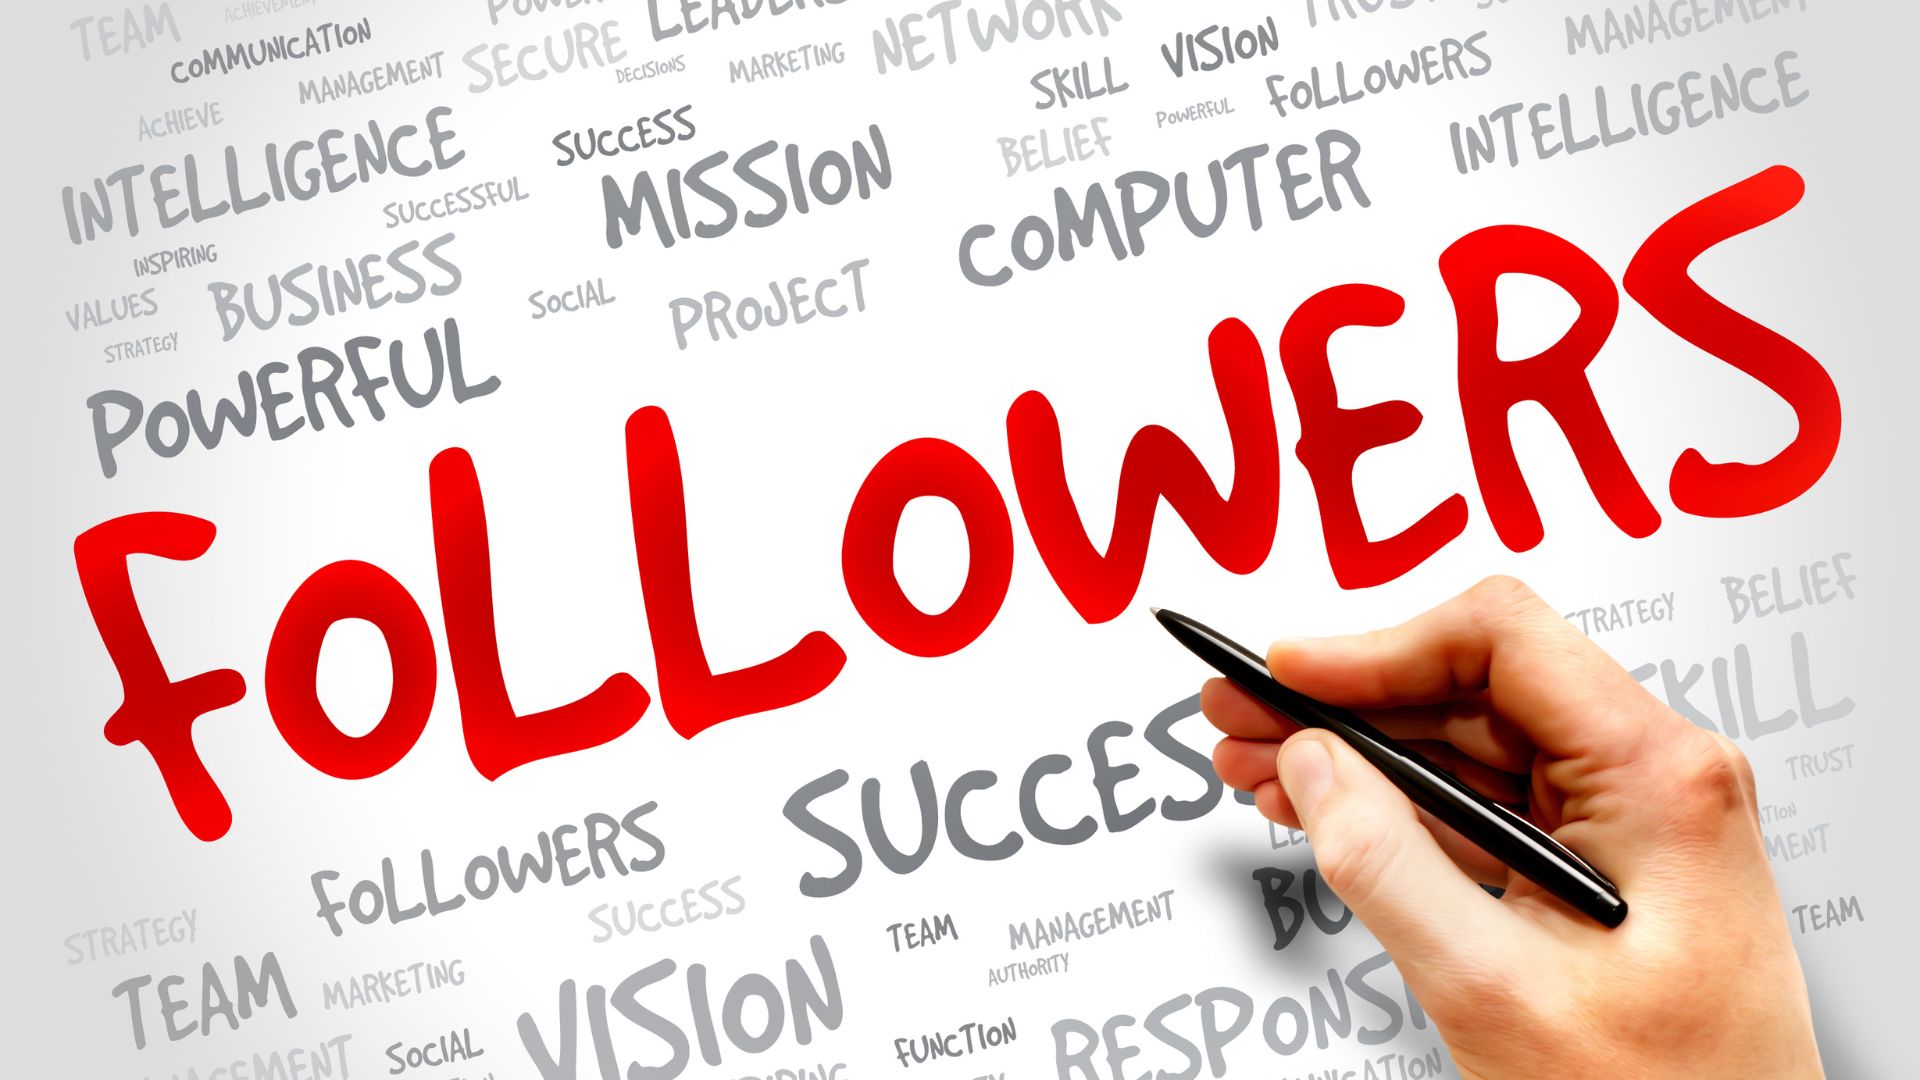 How to Increase Followers Without Spending Money